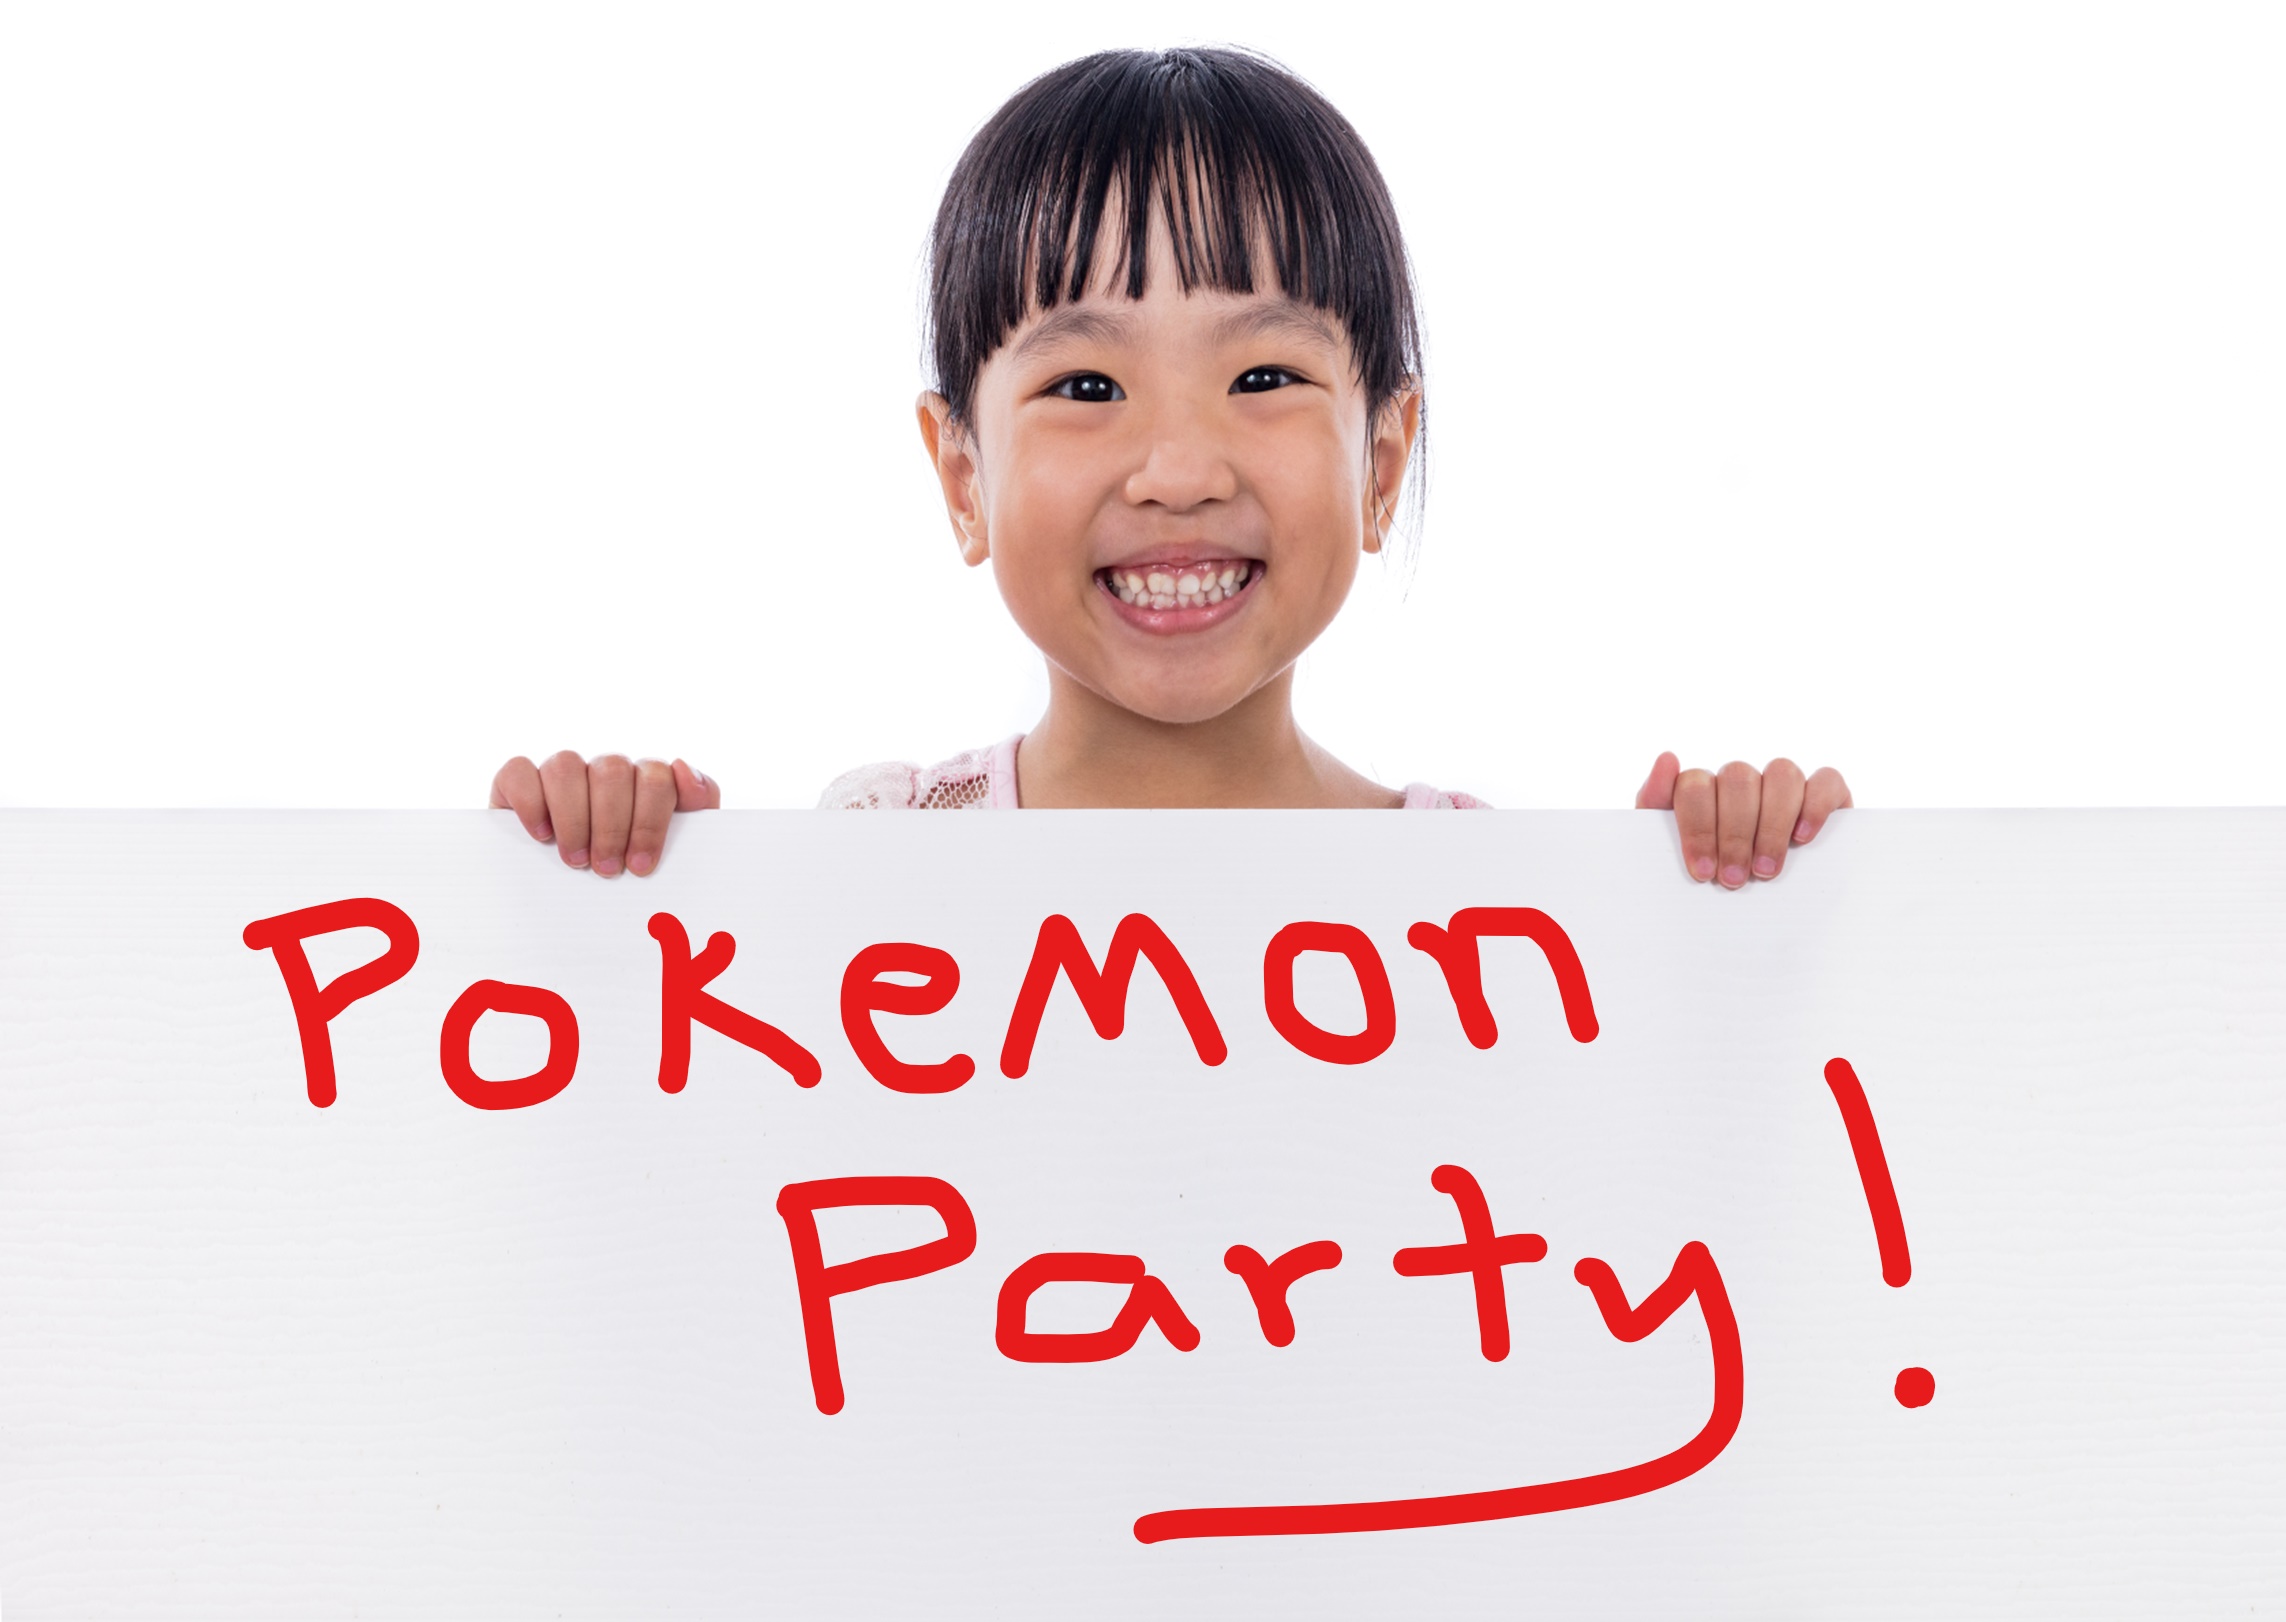 Child holding sign that says Pokemon Party! in red text